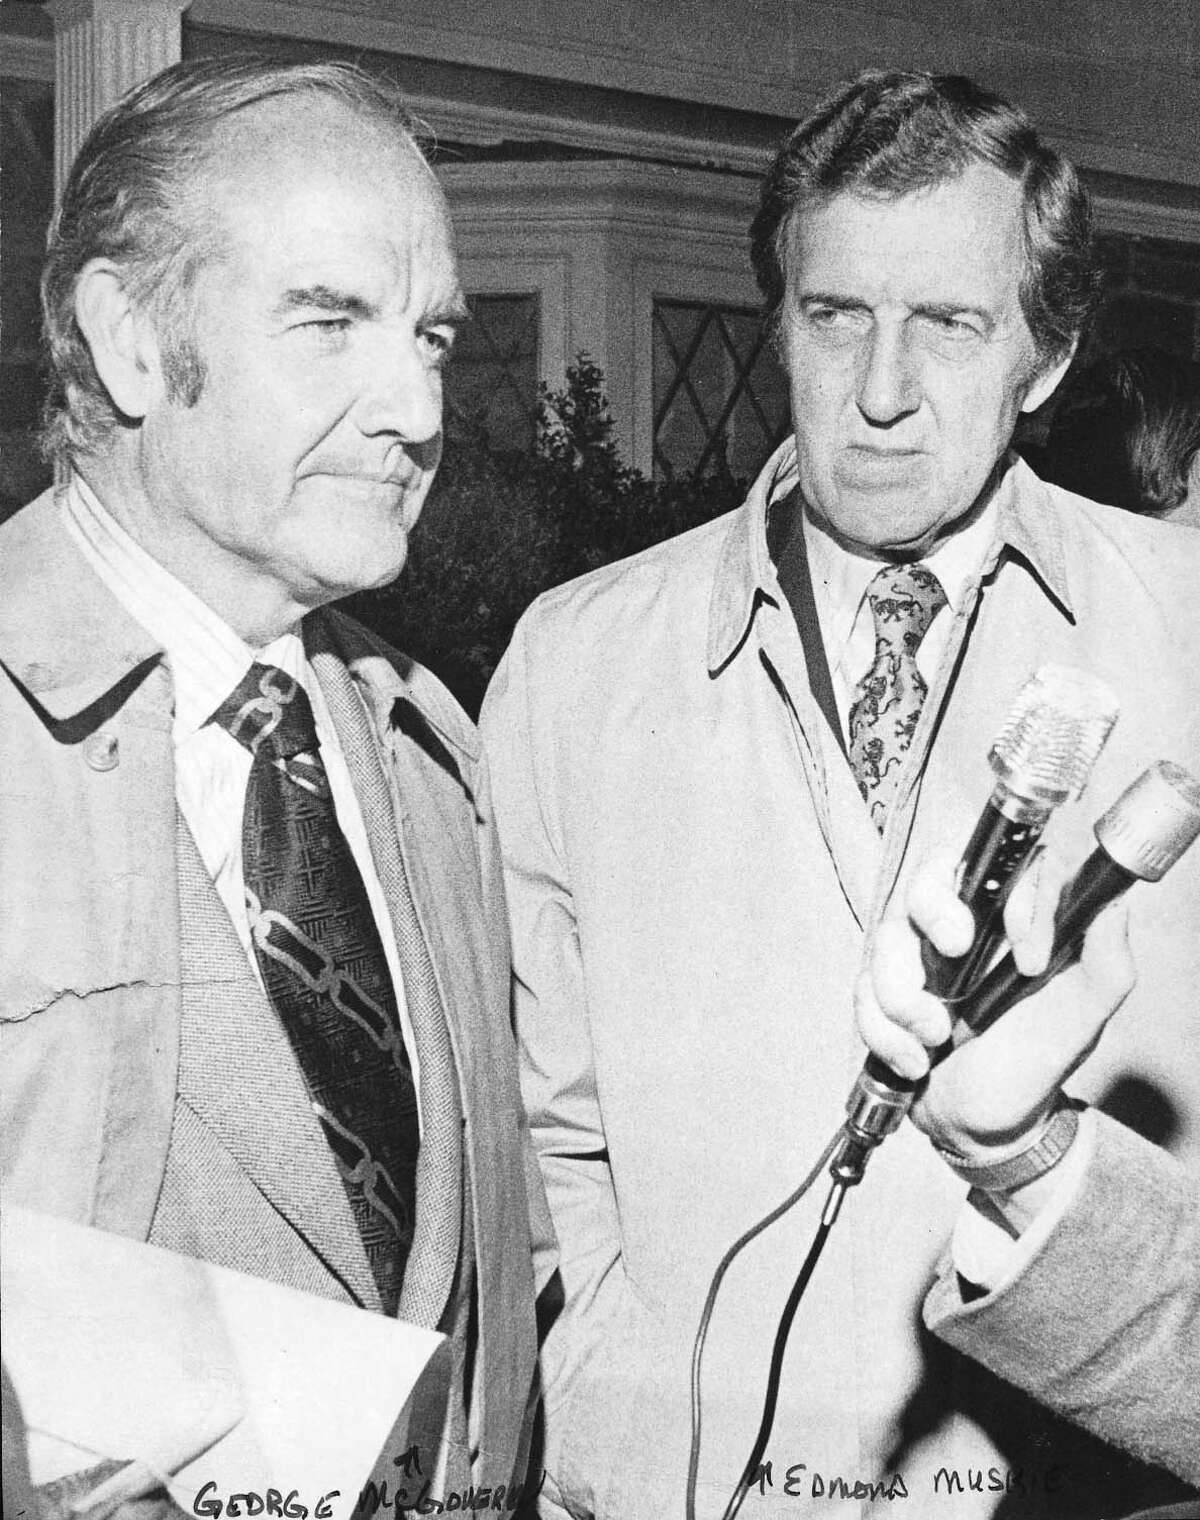 Staff file photo - U.S. Presidential candidate George McGovern, left, and vice presidential candidate Edmund Muskie talk to the media during a campaign stop in Stamford, Conn., on Oct. 21, 1972. McGovern died Sunday, June 21, 2012.